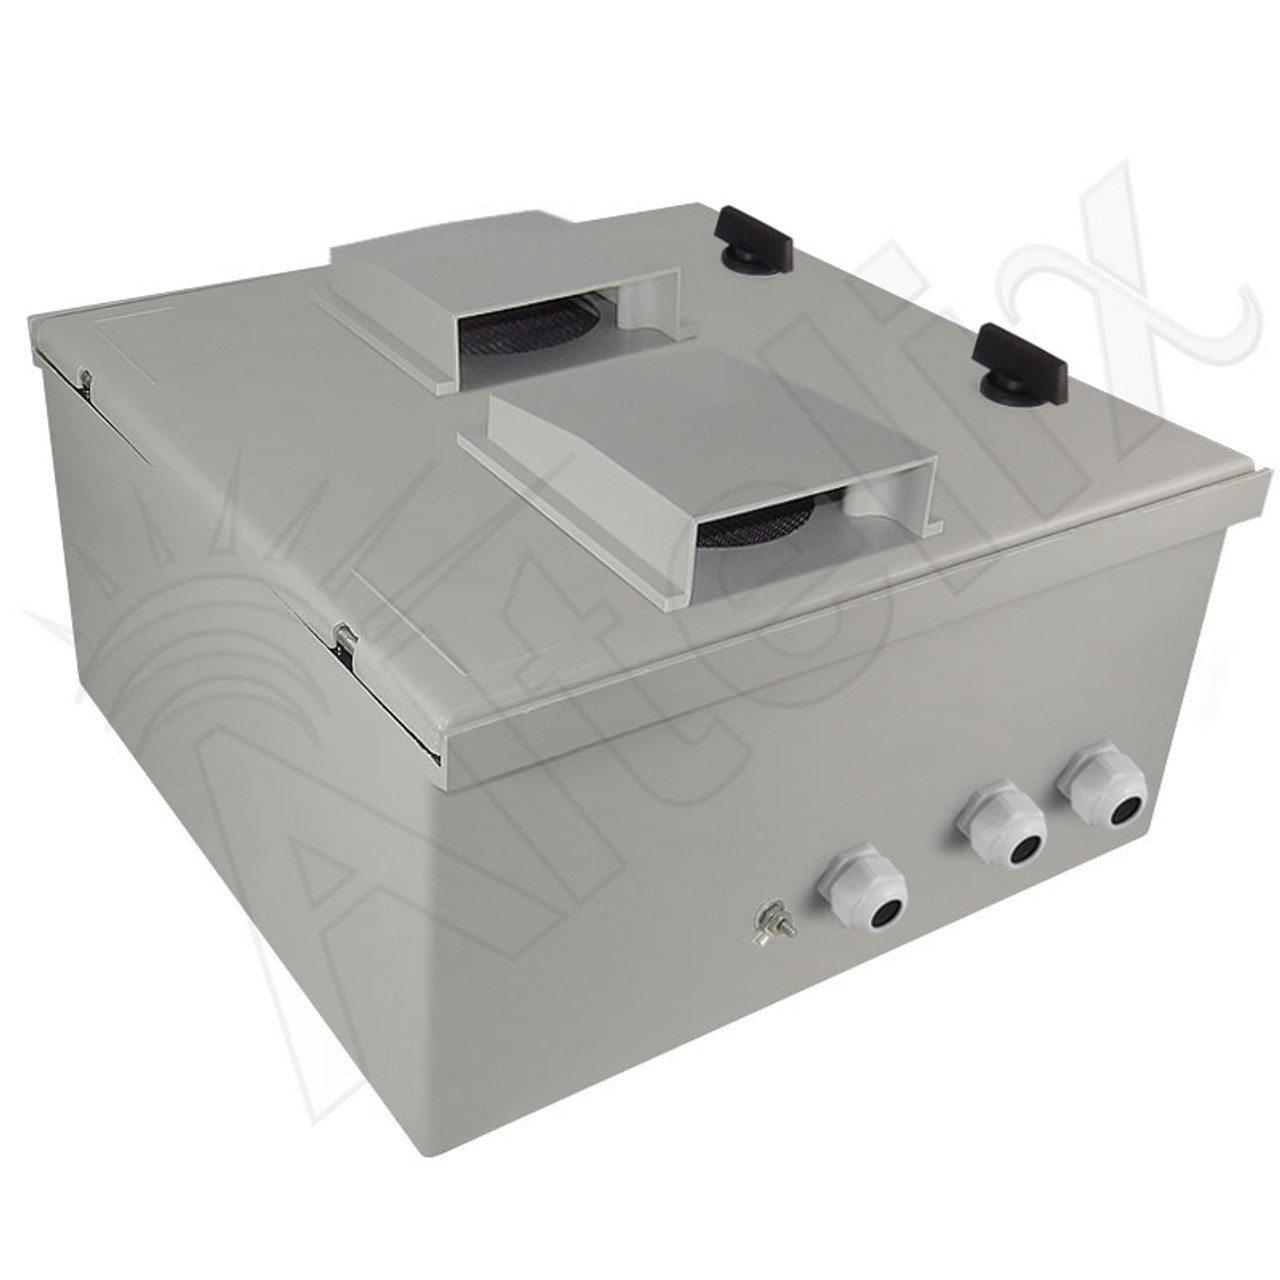 Altelix 16x16x8 Vented Insulated Fiberglass Weatherproof NEMA Enclosure  with Cooling Fan, 200W Heater and 120 VAC Outlets